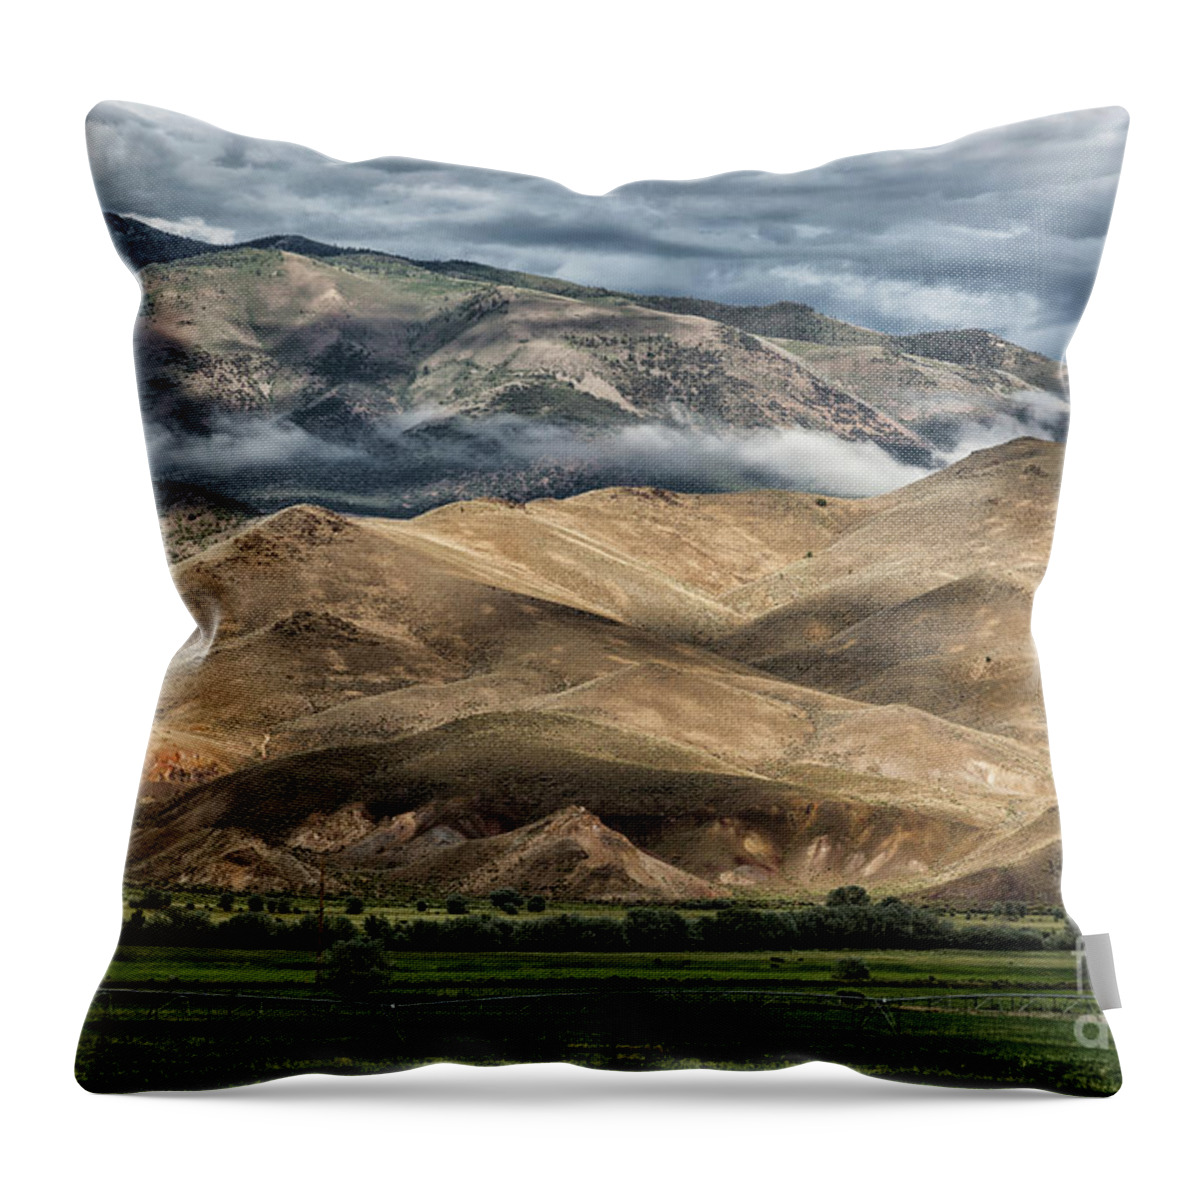 Utah Throw Pillow featuring the photograph Layers by Kathy McClure